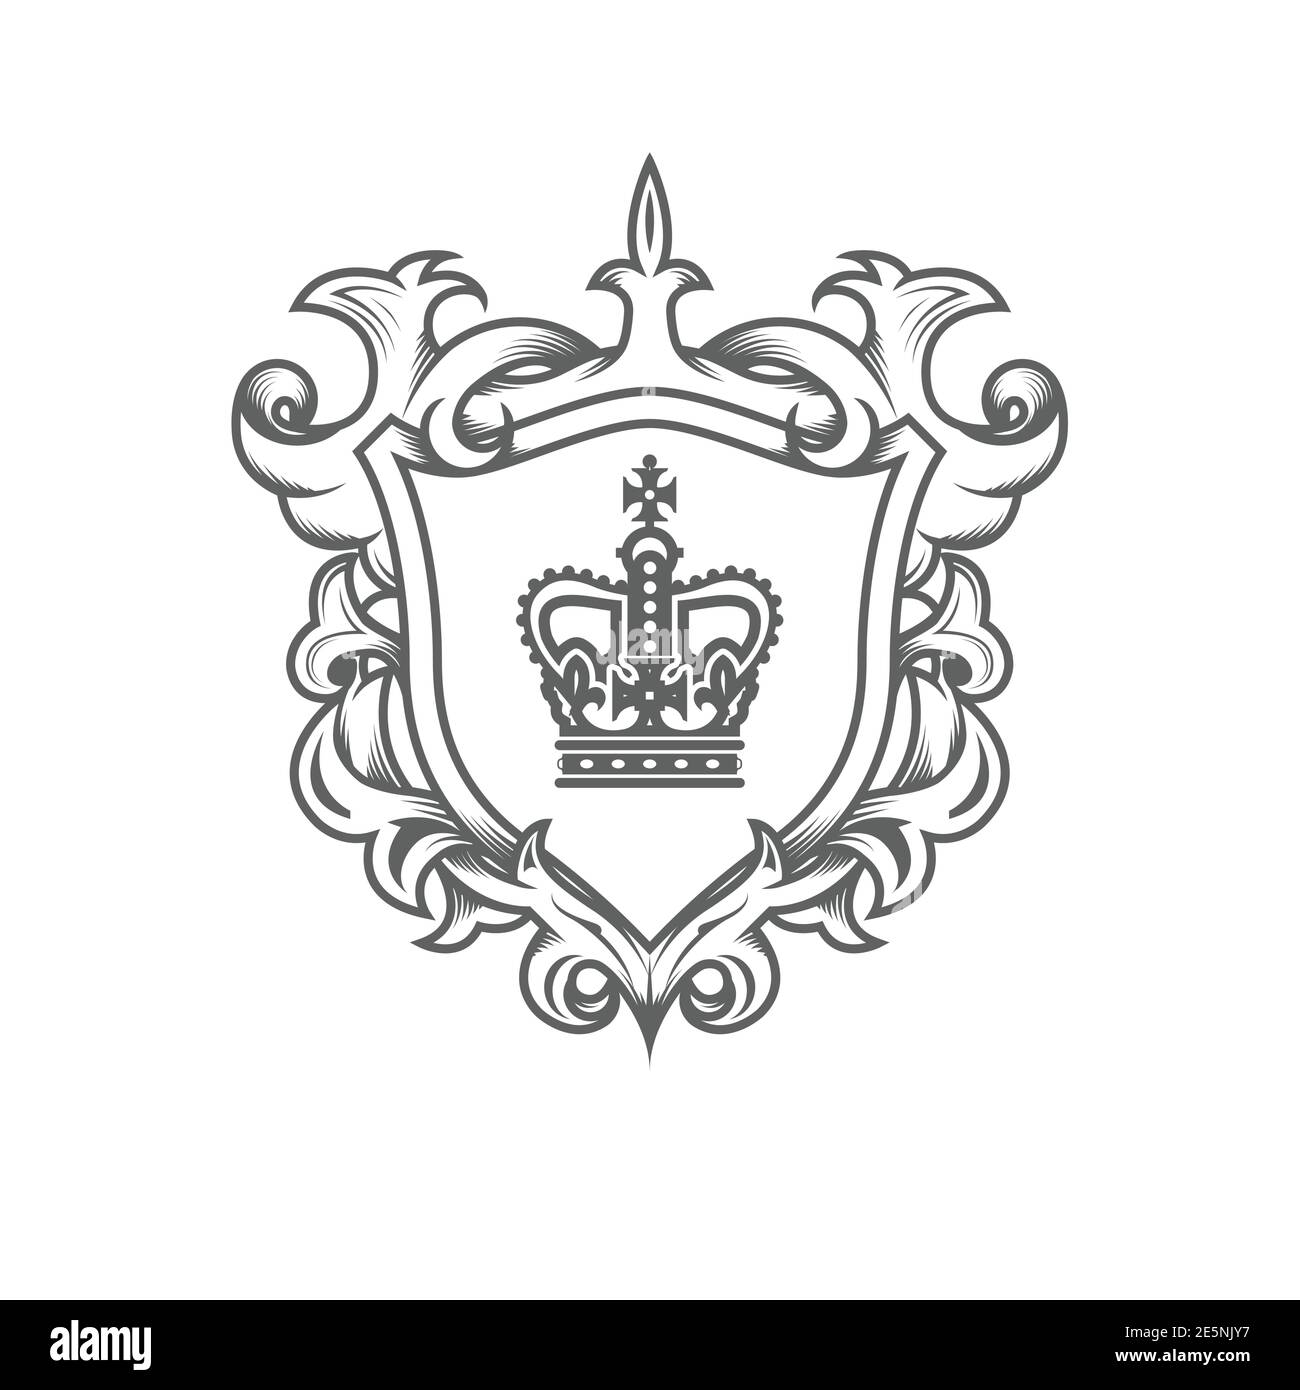 Heraldic monarch blazon, imperial coat of arms with shield and ornate pattern, royal ancestral crest, vector Stock Vector